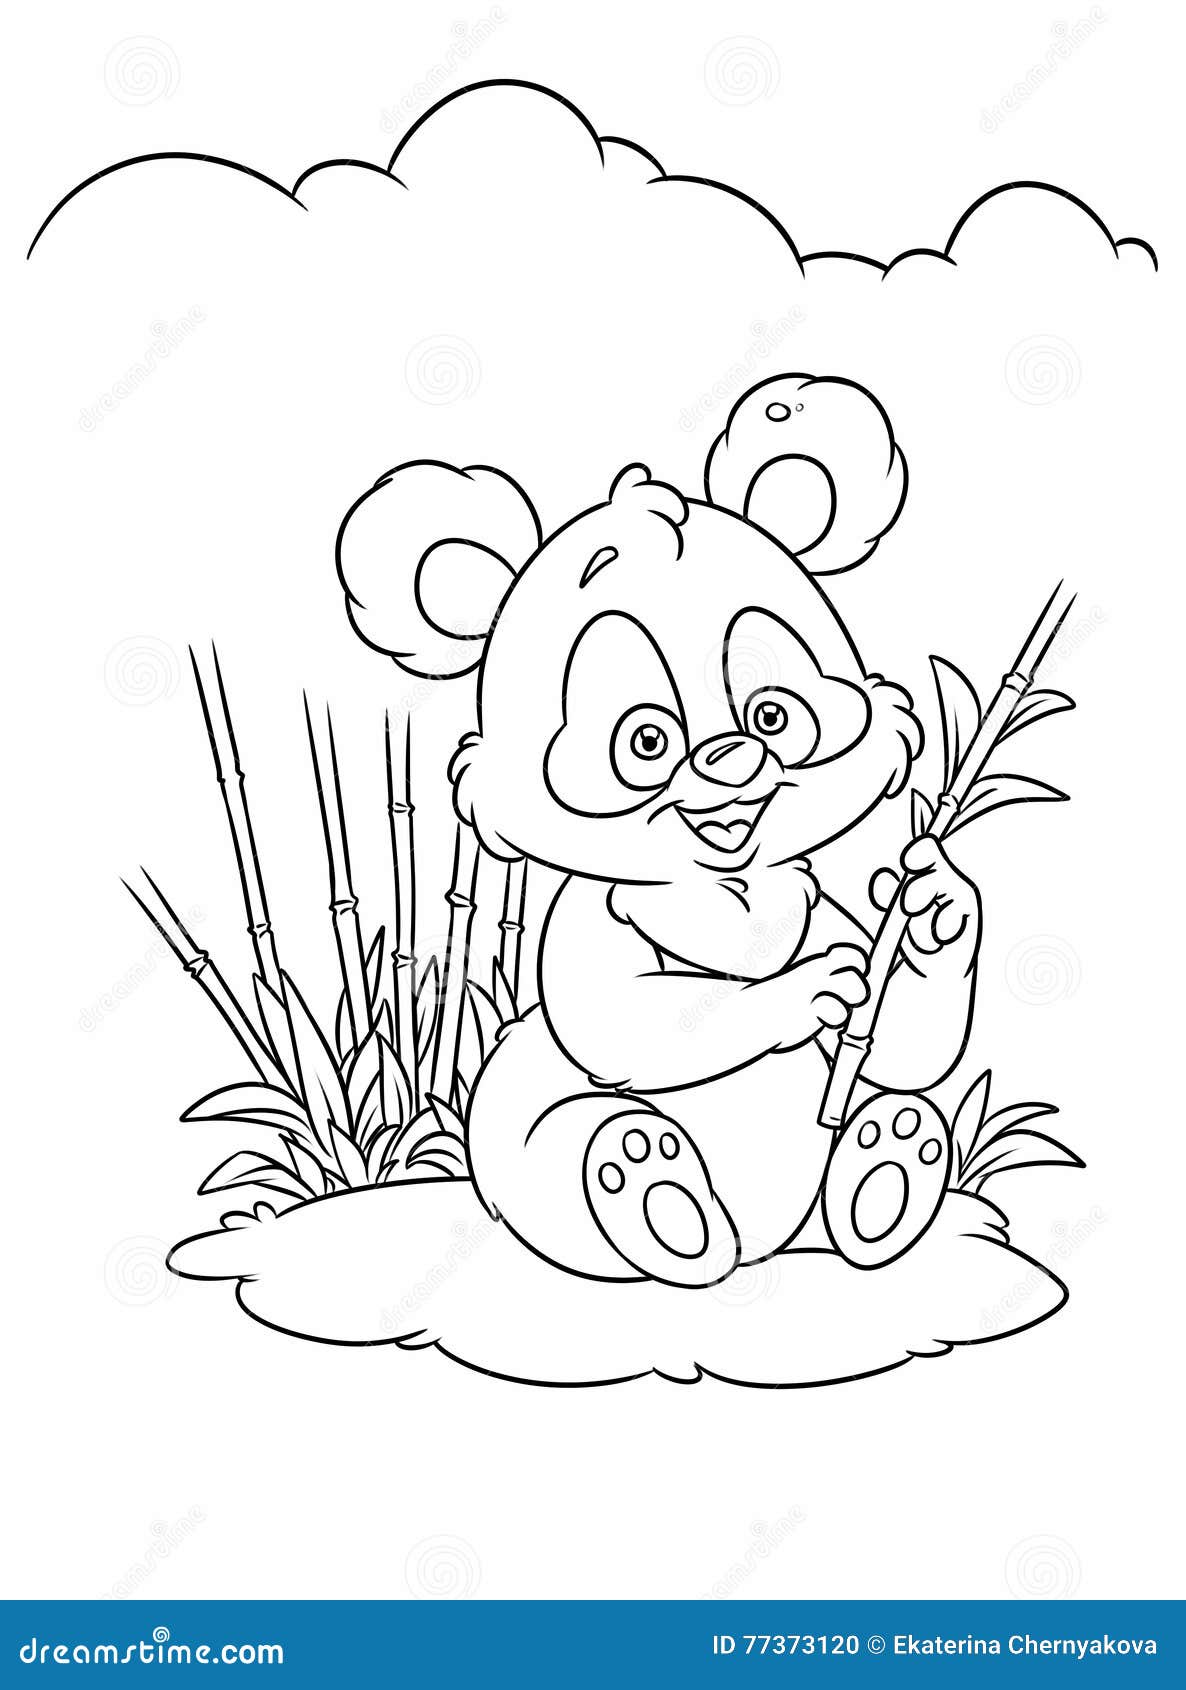 Download Bamboo Panda Coloring Pages Stock Illustration ...